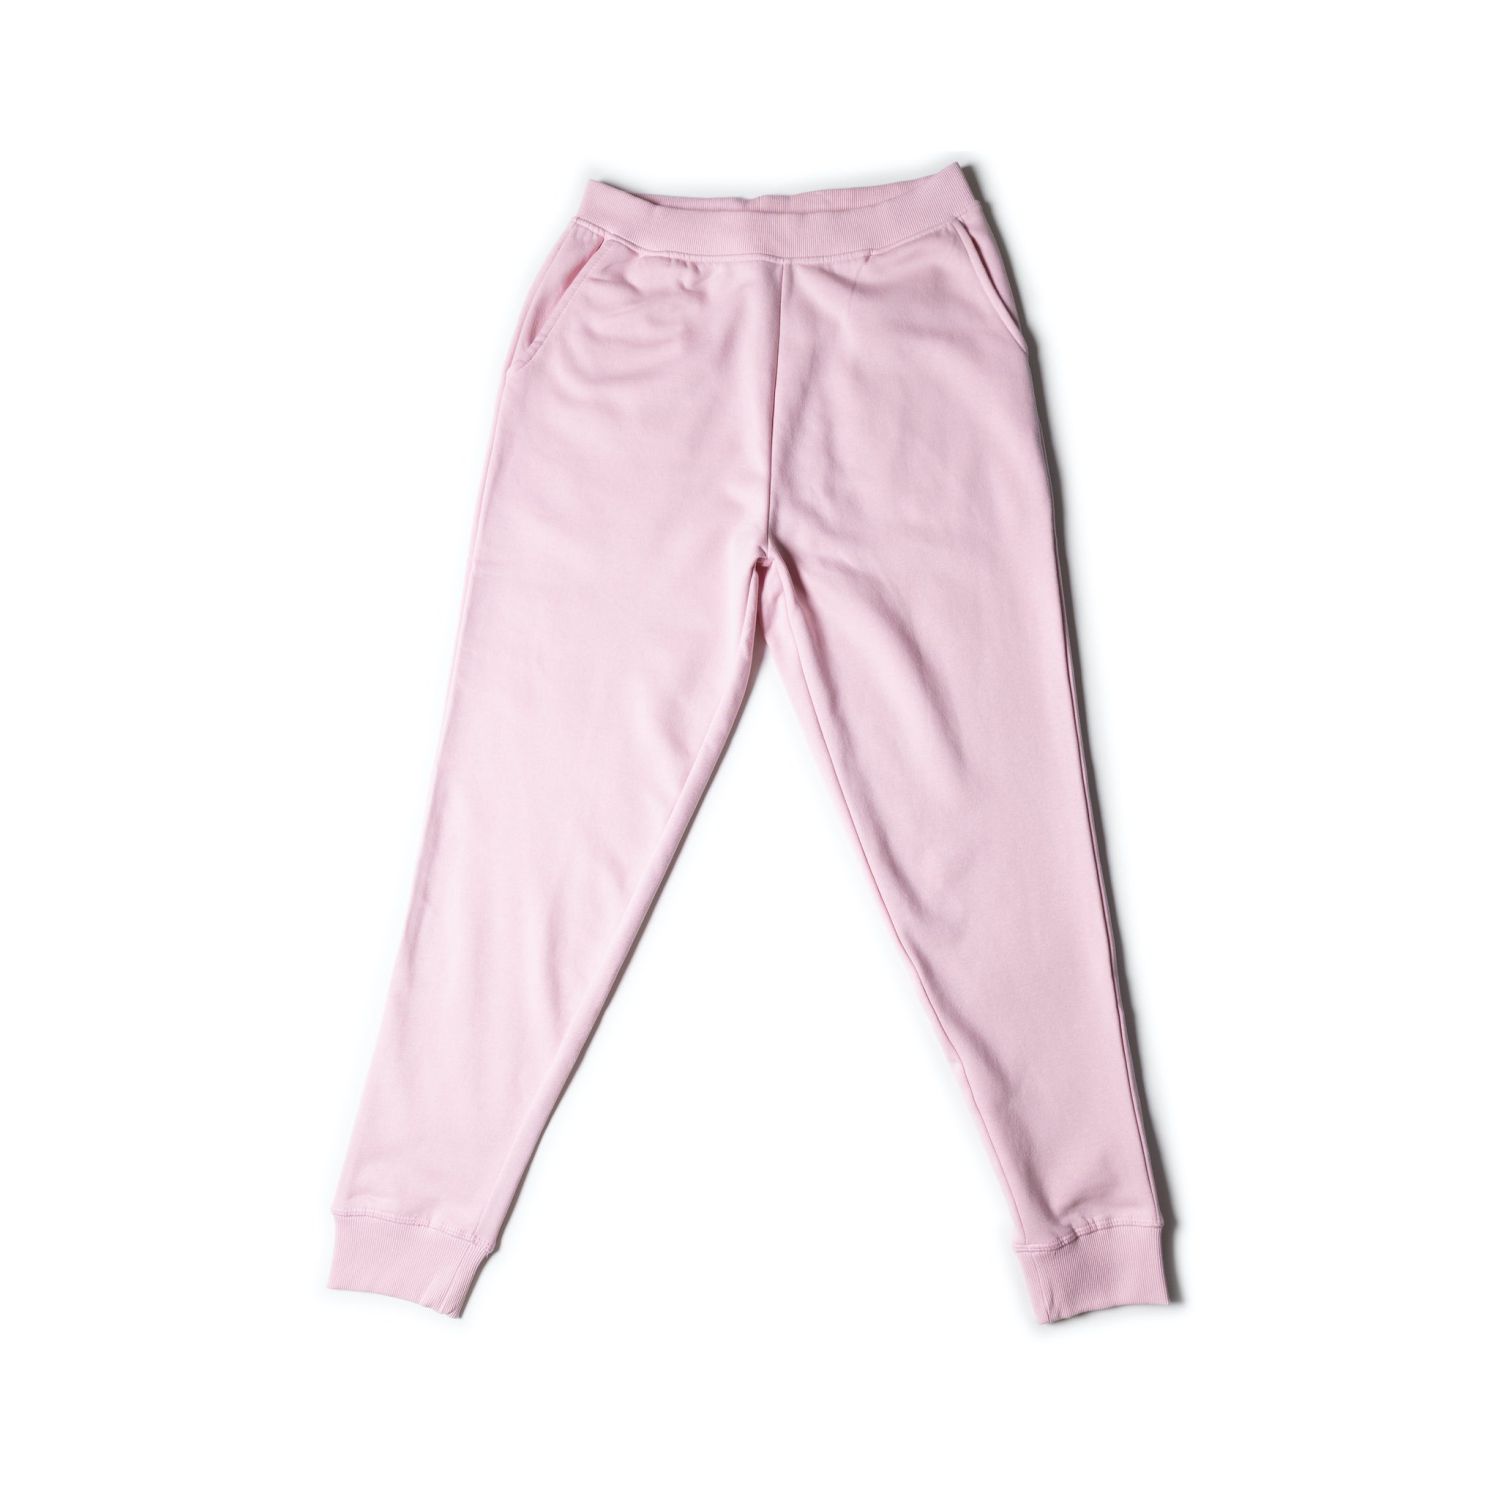 Just Like Hero Joggers #5020R Pink